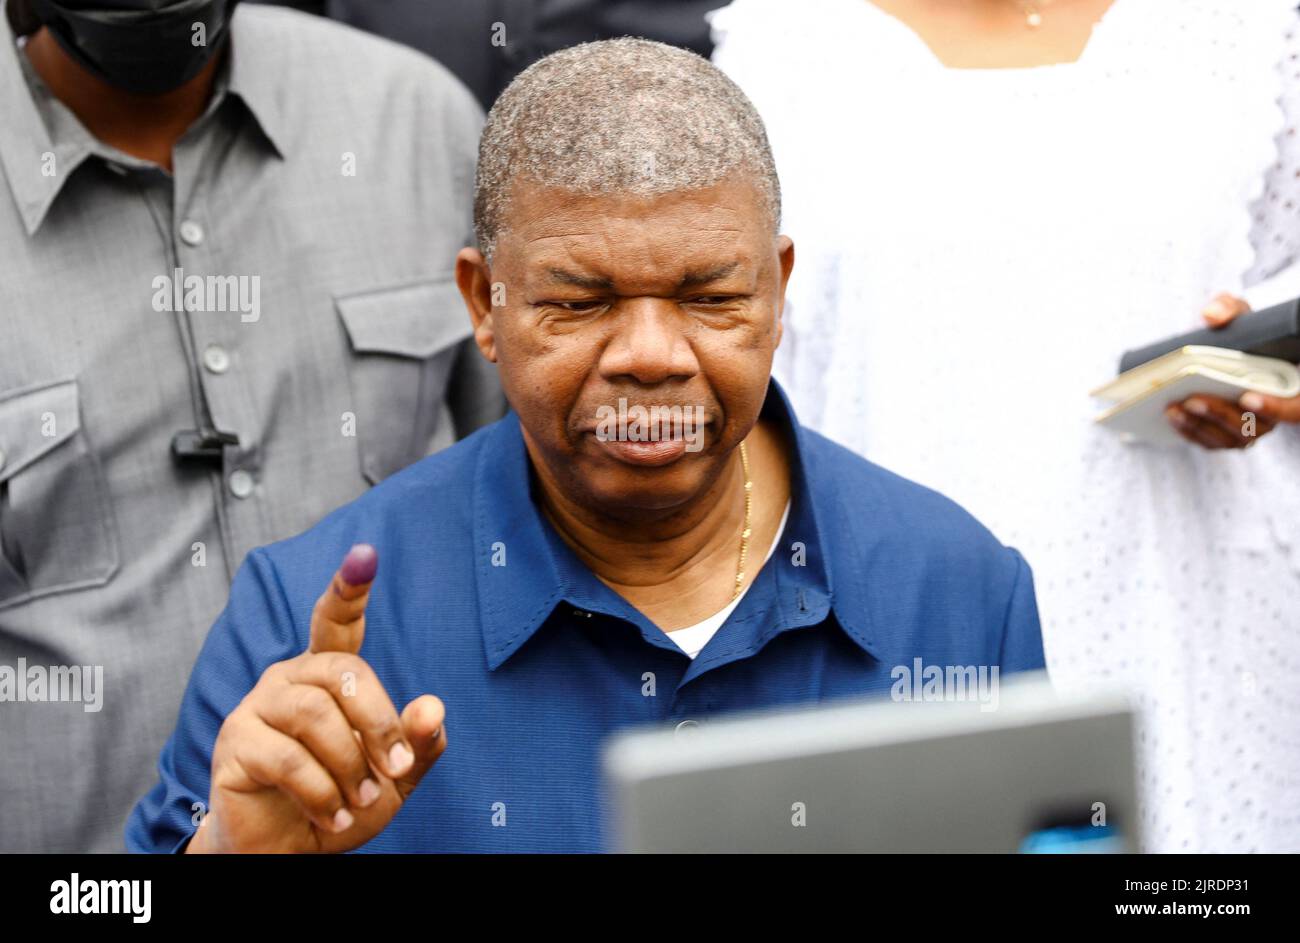 Angola's President and leader of the People's Movement for the Liberation of Angola (MPLA) ruling party, Joao Lourenco, gestures after castsing his vote in the general election in the capital Luanda, Angola August 24, 2022. REUTERS/Siphiwe Sibeko Stock Photo